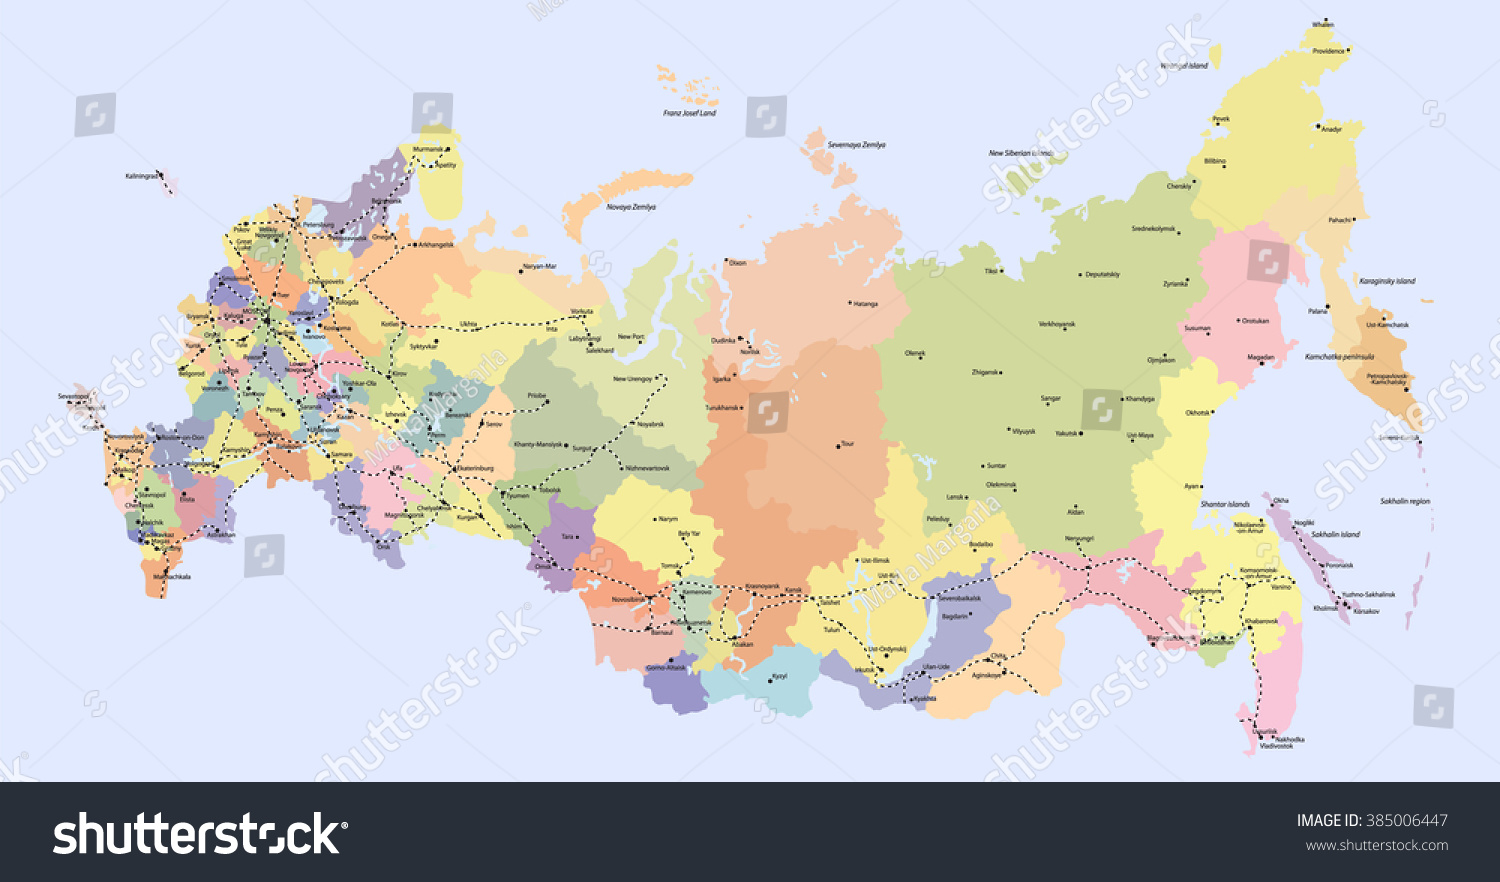 Of Russian Cities And Regions 42